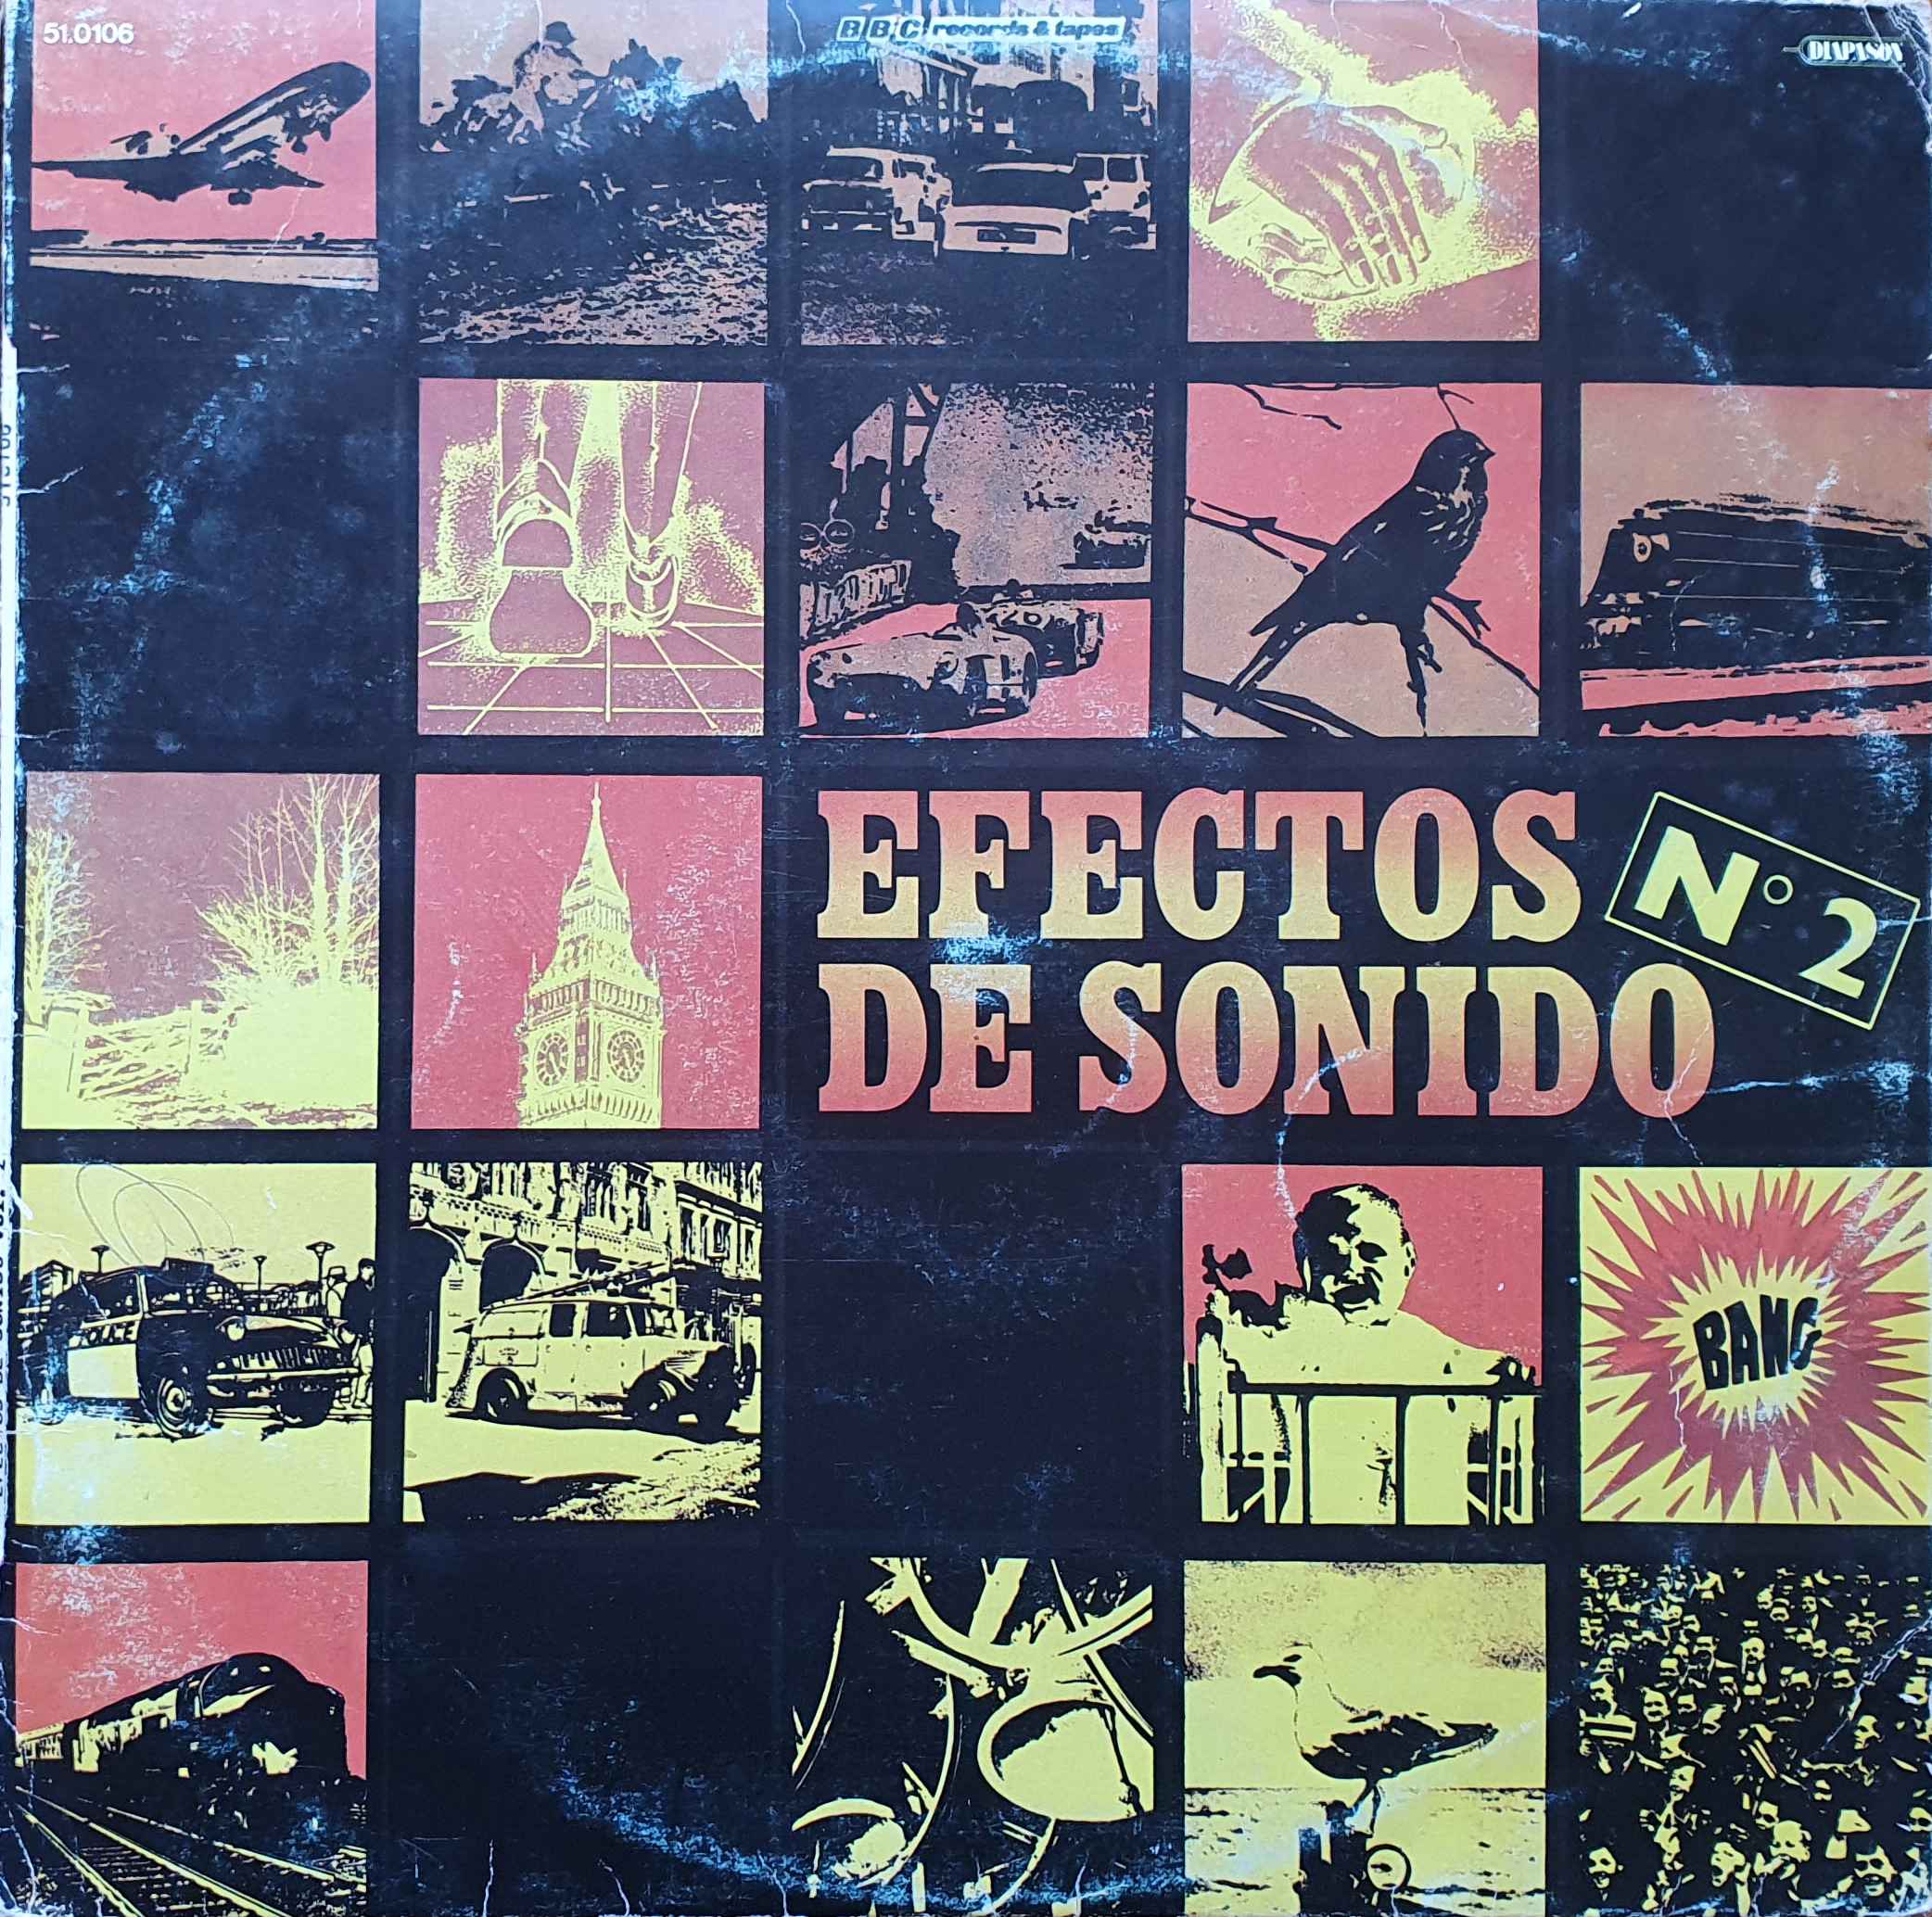 Picture of 51.0106 Efectos de sonido No 2 (Spanish import) by artist Various from the BBC albums - Records and Tapes library